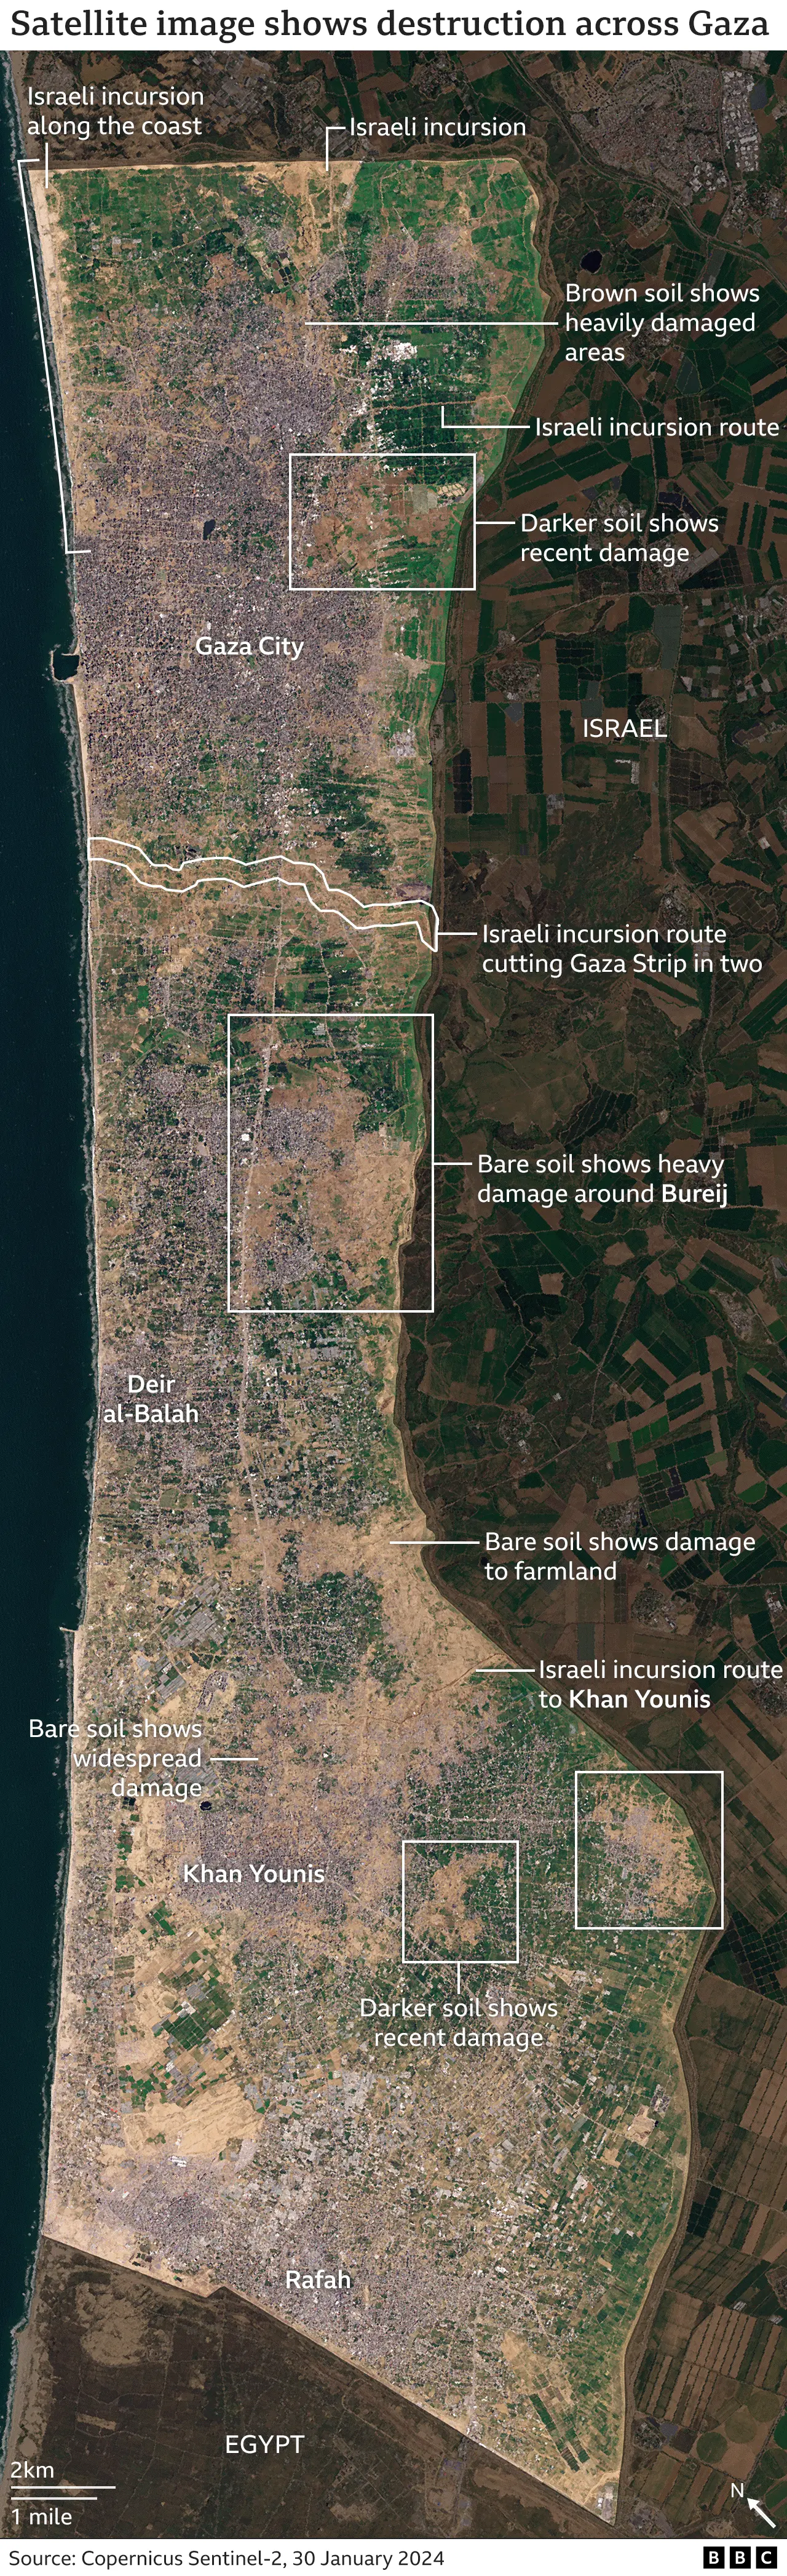 At least half of Gaza's buildings damaged or destroyed, new analysis shows